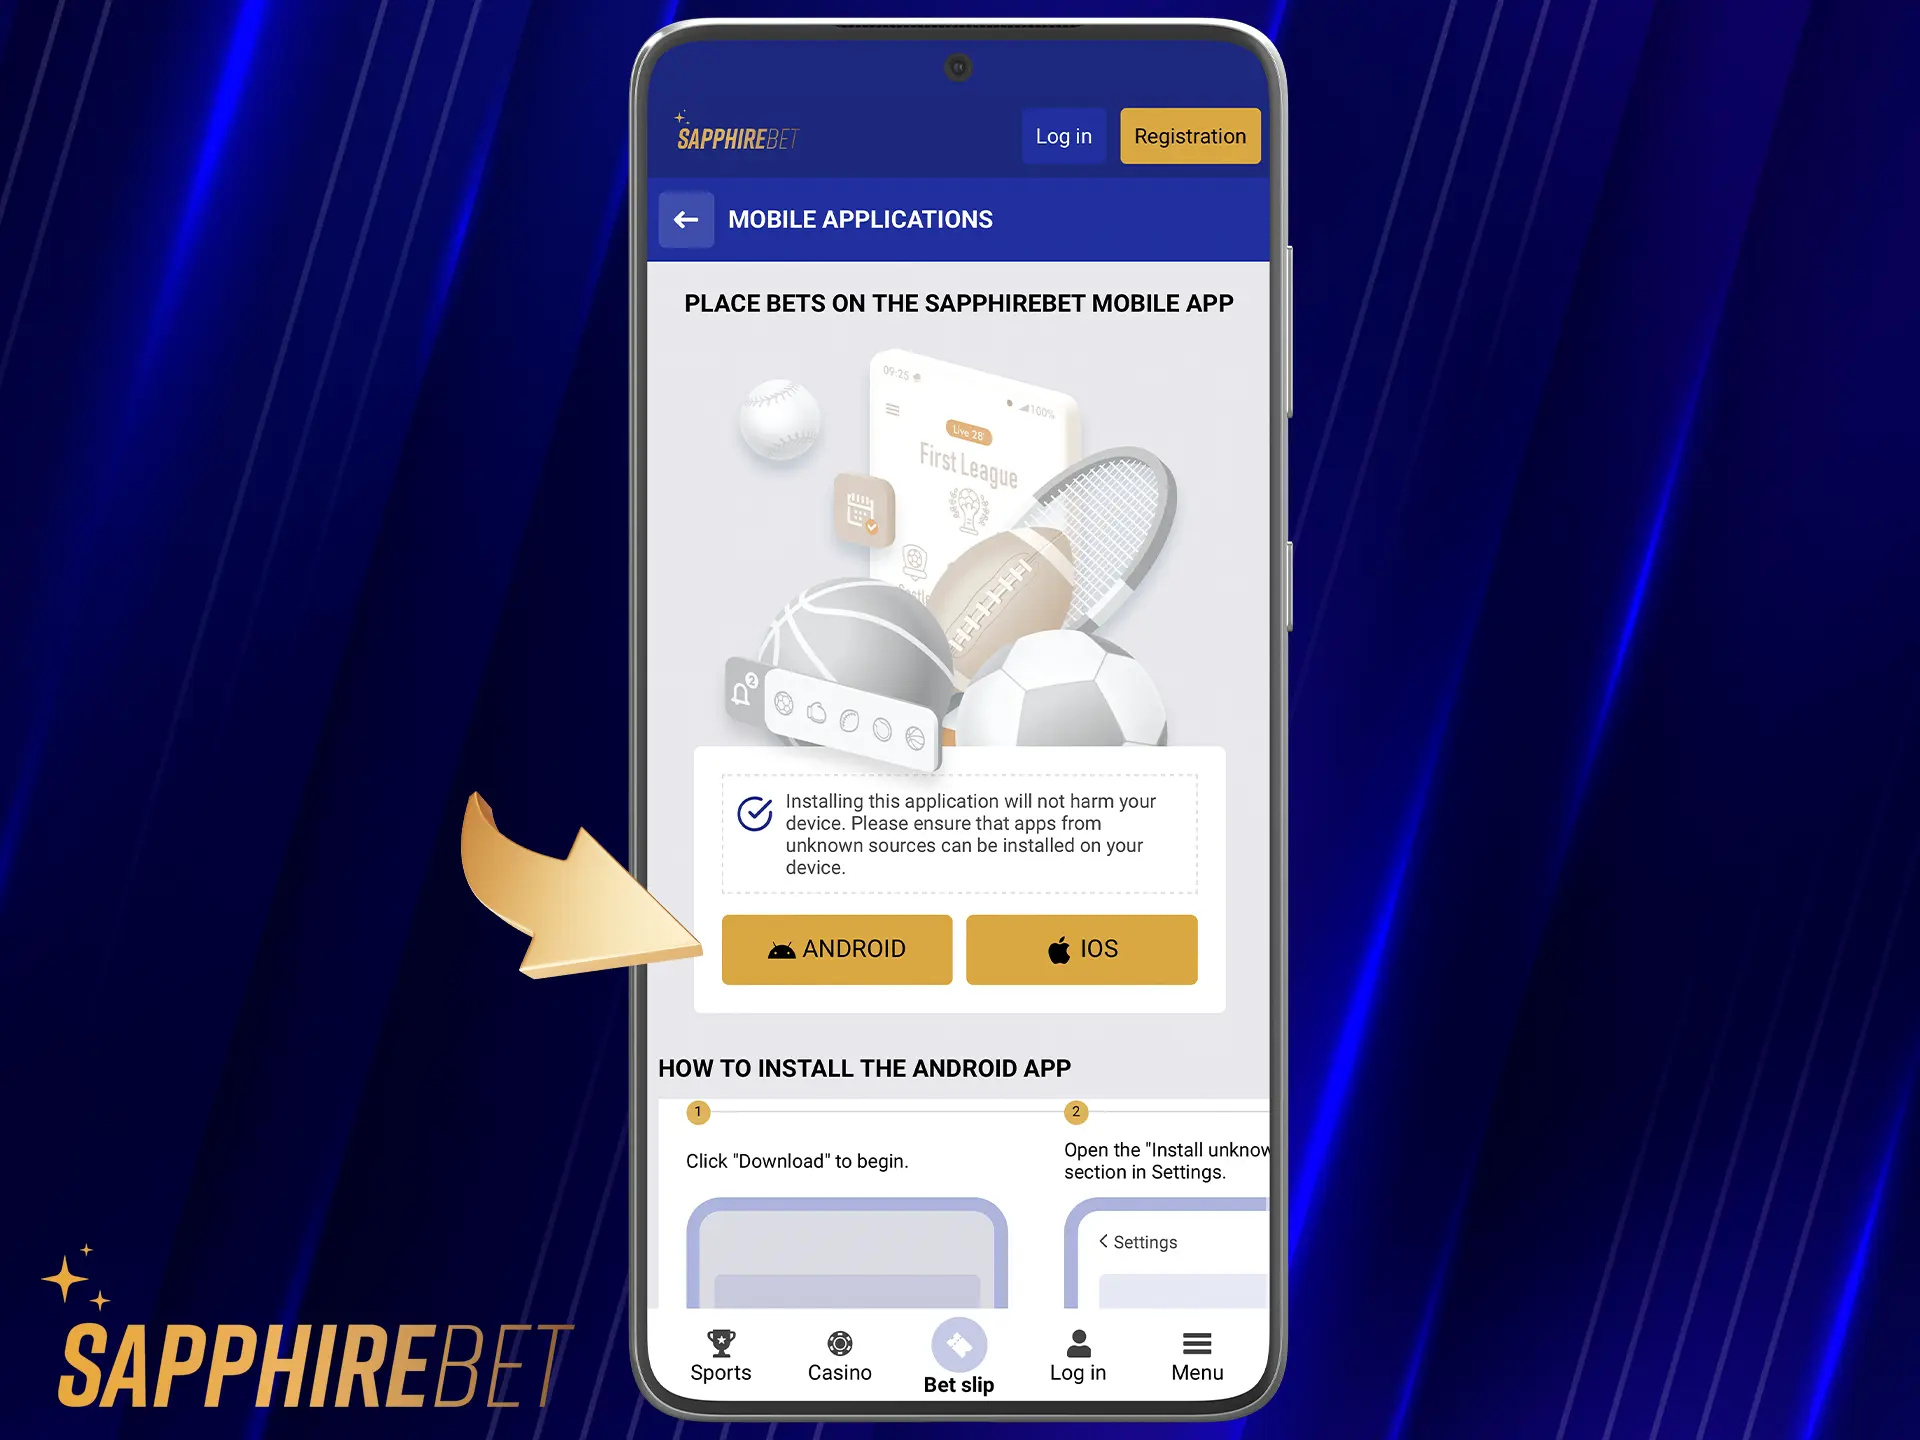 Download the APK file from the official SapphireBet website.